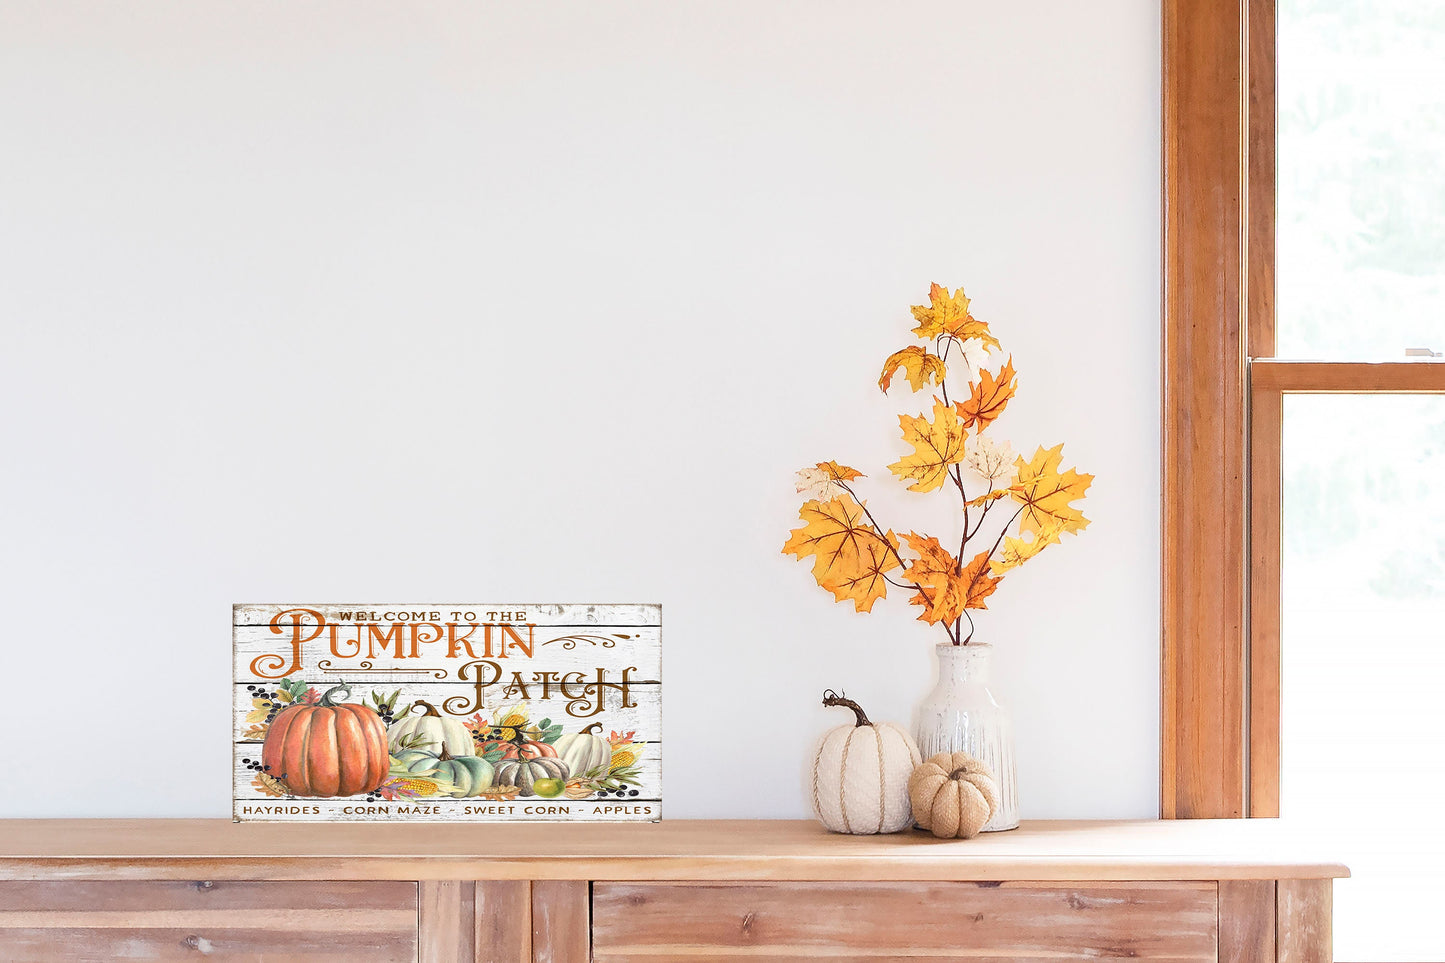 Welcome to the Pumpkin Patch Fall Printed Handmade Wood Sign